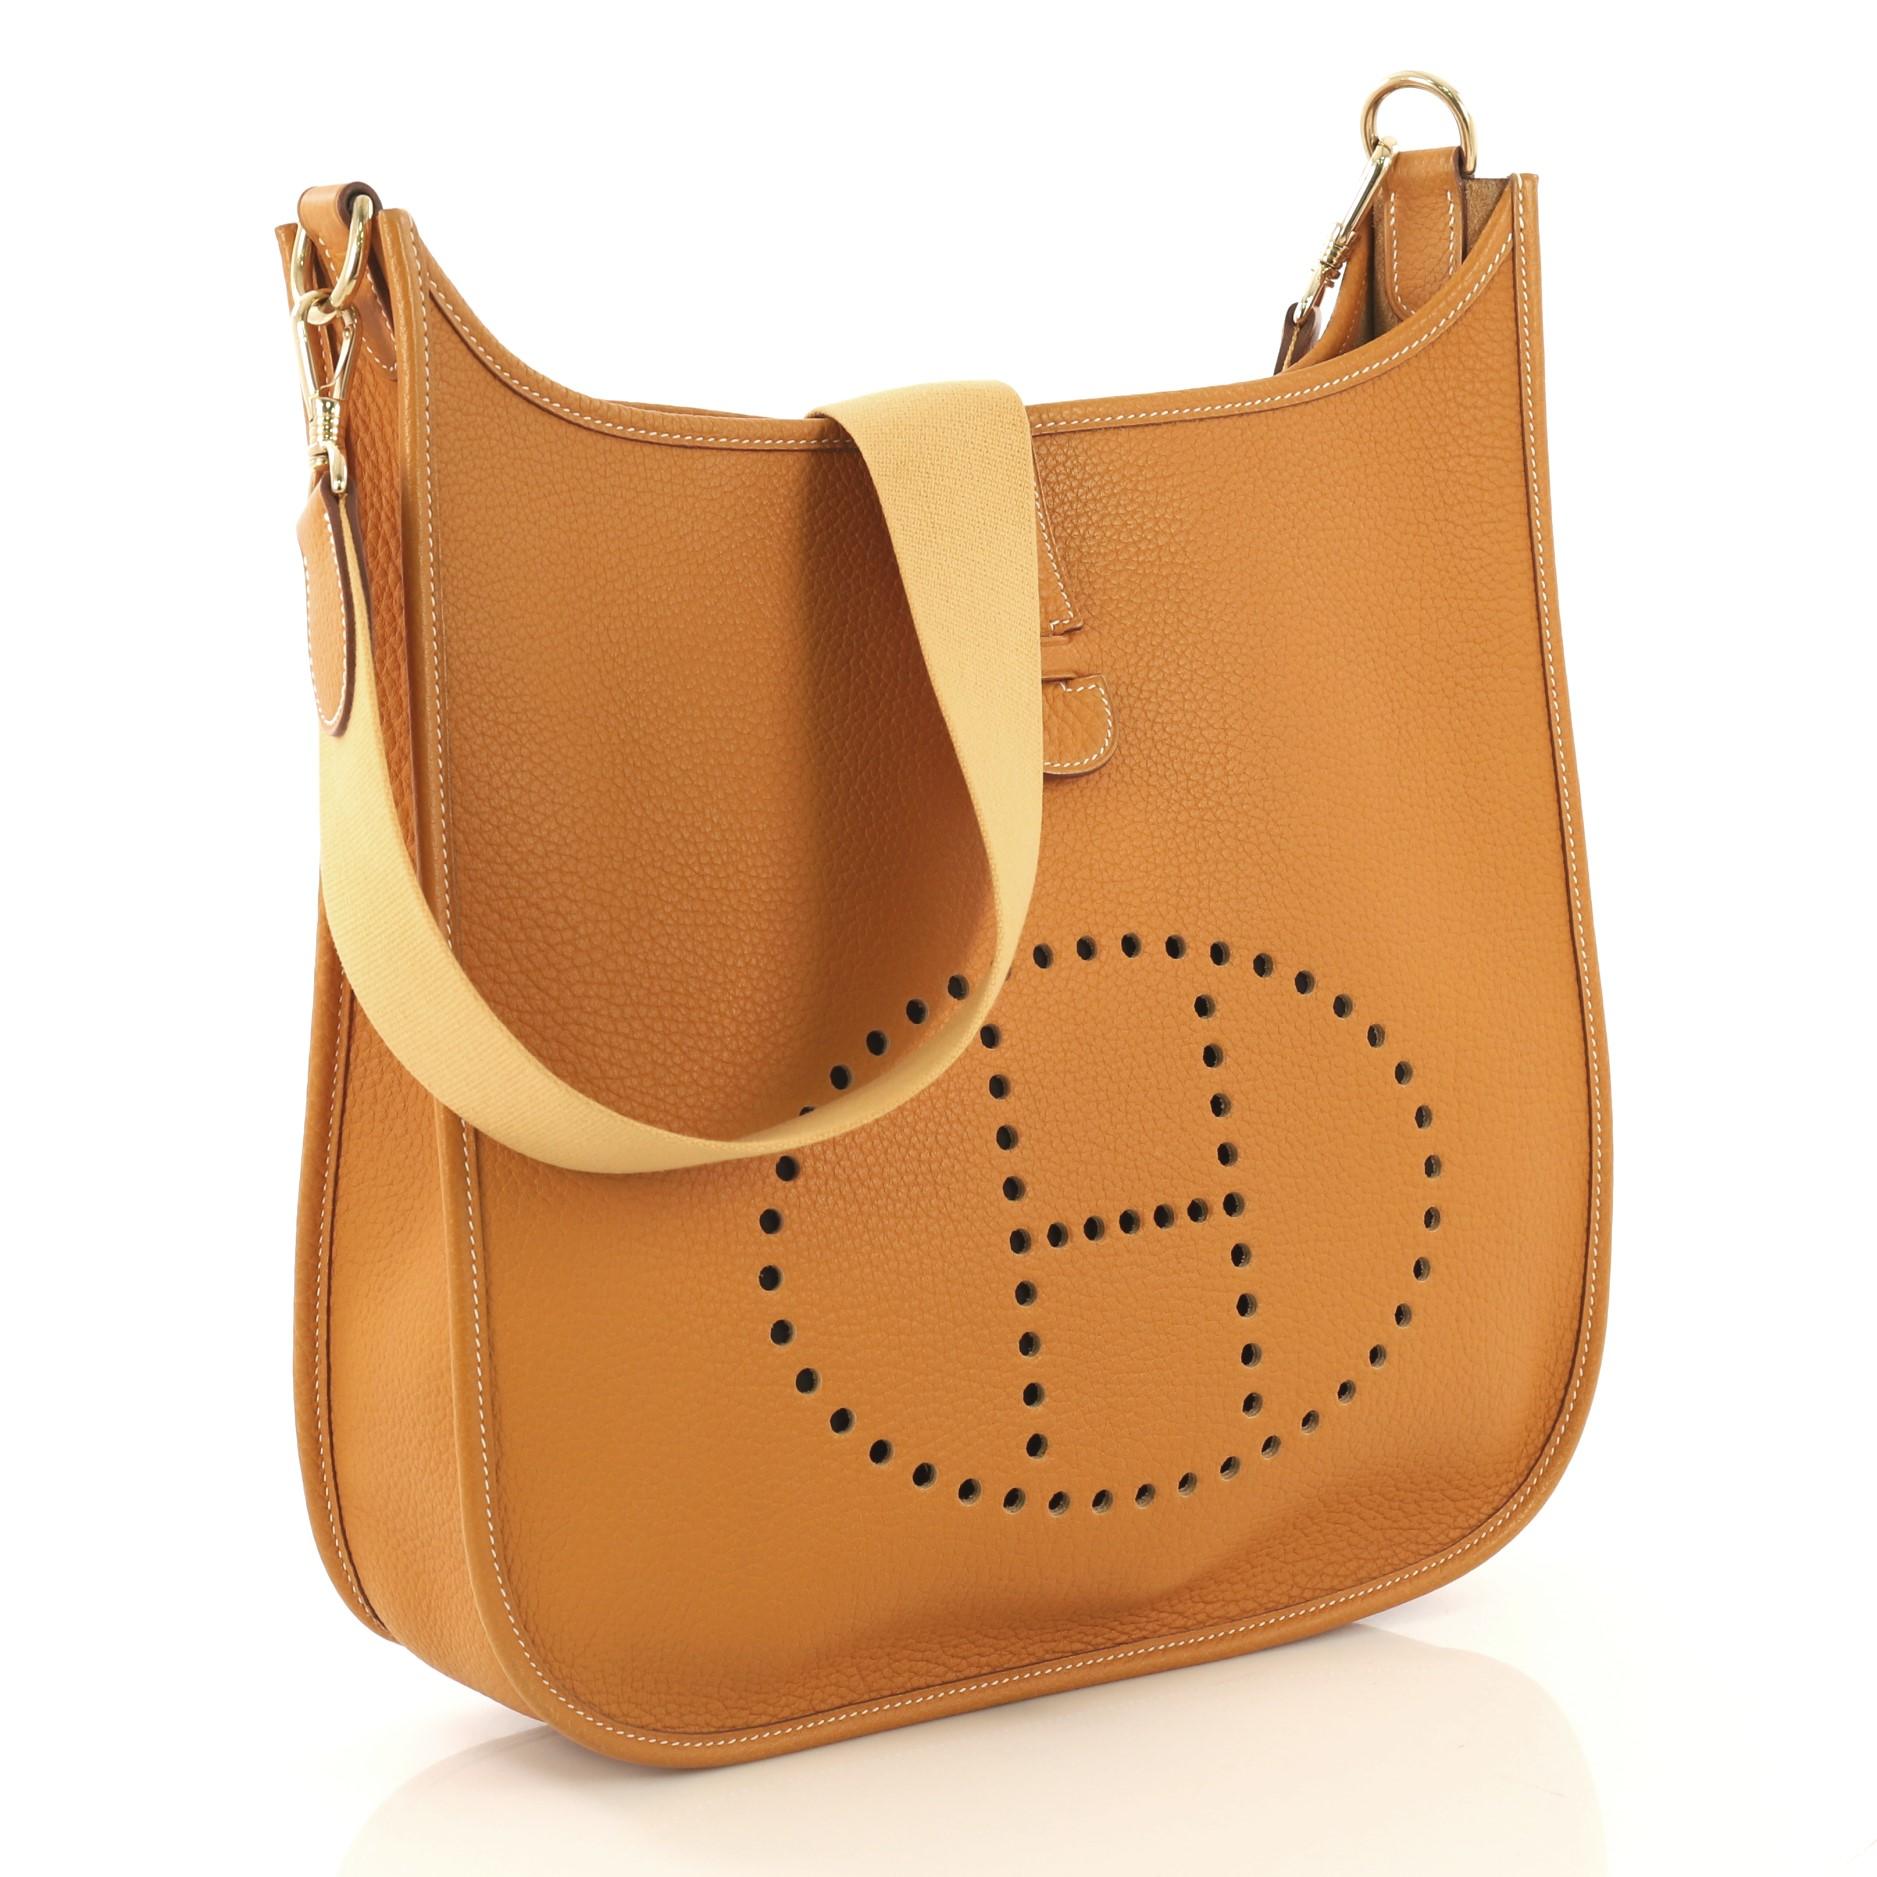 This Hermes Evelyne Crossbody Gen I Fjord GM, crafted from Natural Sable Fjord leather, features a perforated H design at the front, textile shoulder strap and gold hardware. It opens to a Natural Sable raw leather interior. Date stamp reads: F